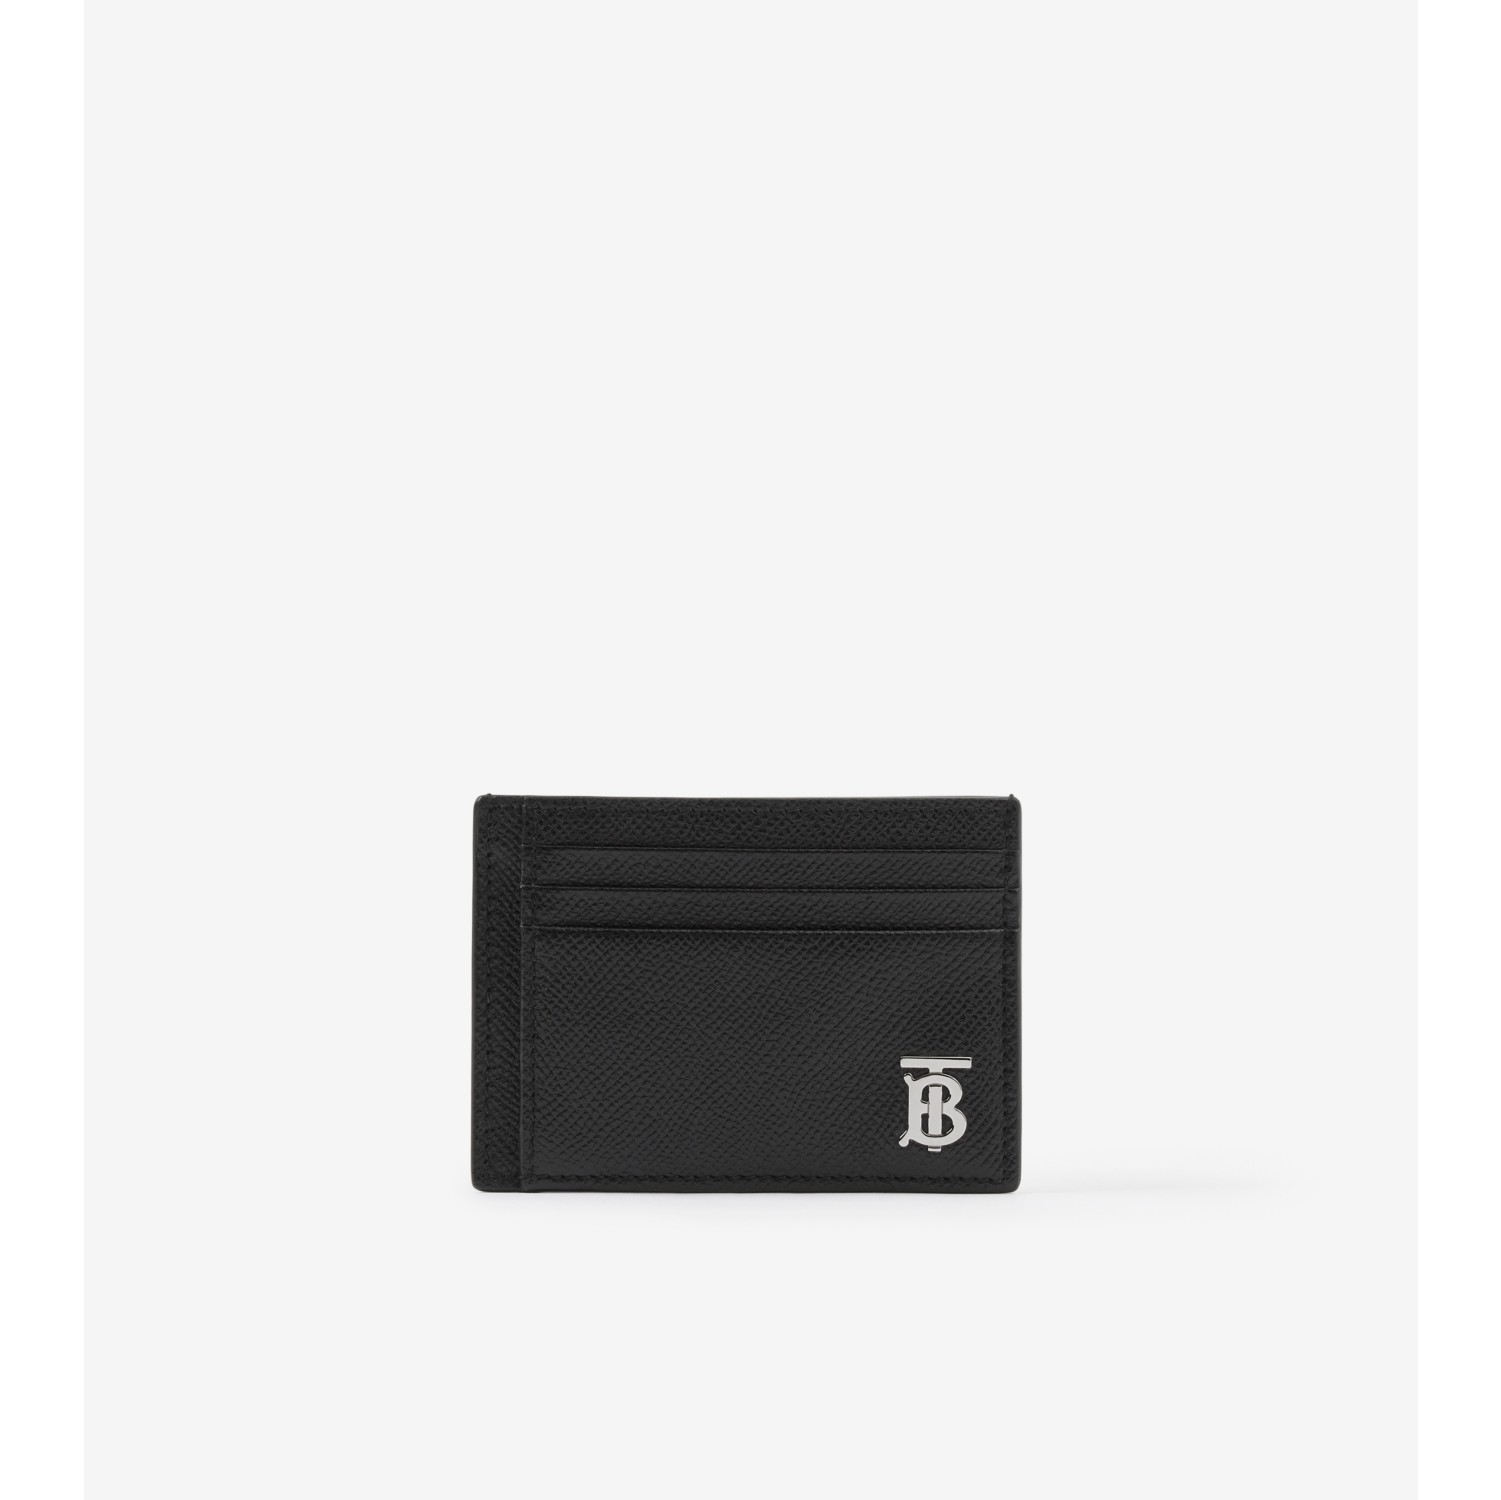 Card case with money clip